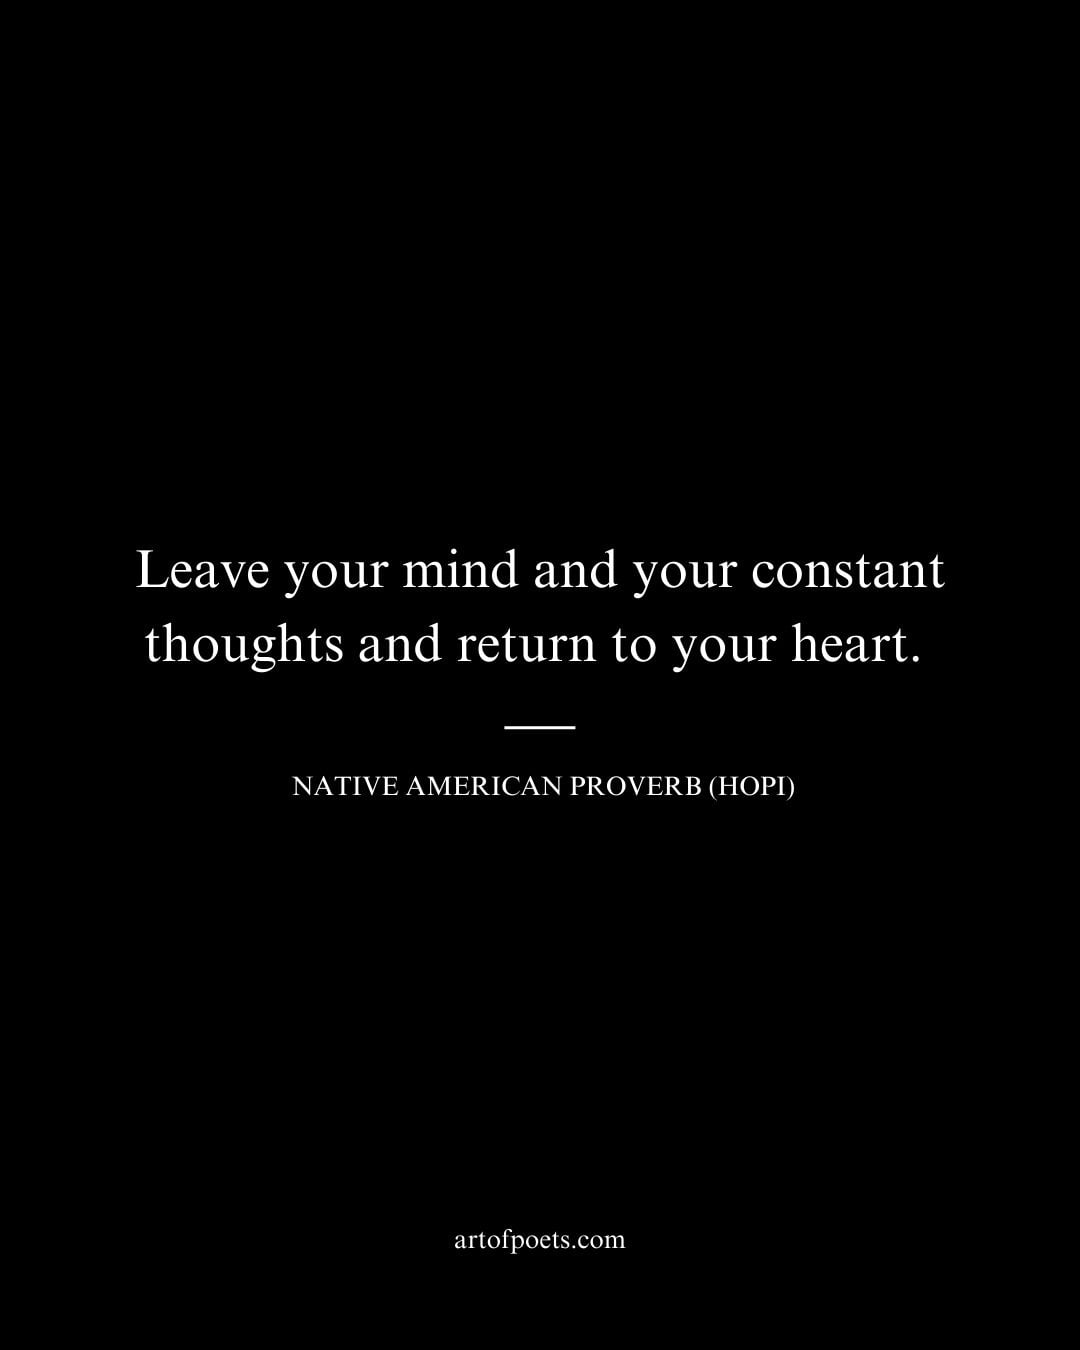 Leave your mind and your constant thoughts and return to your heart